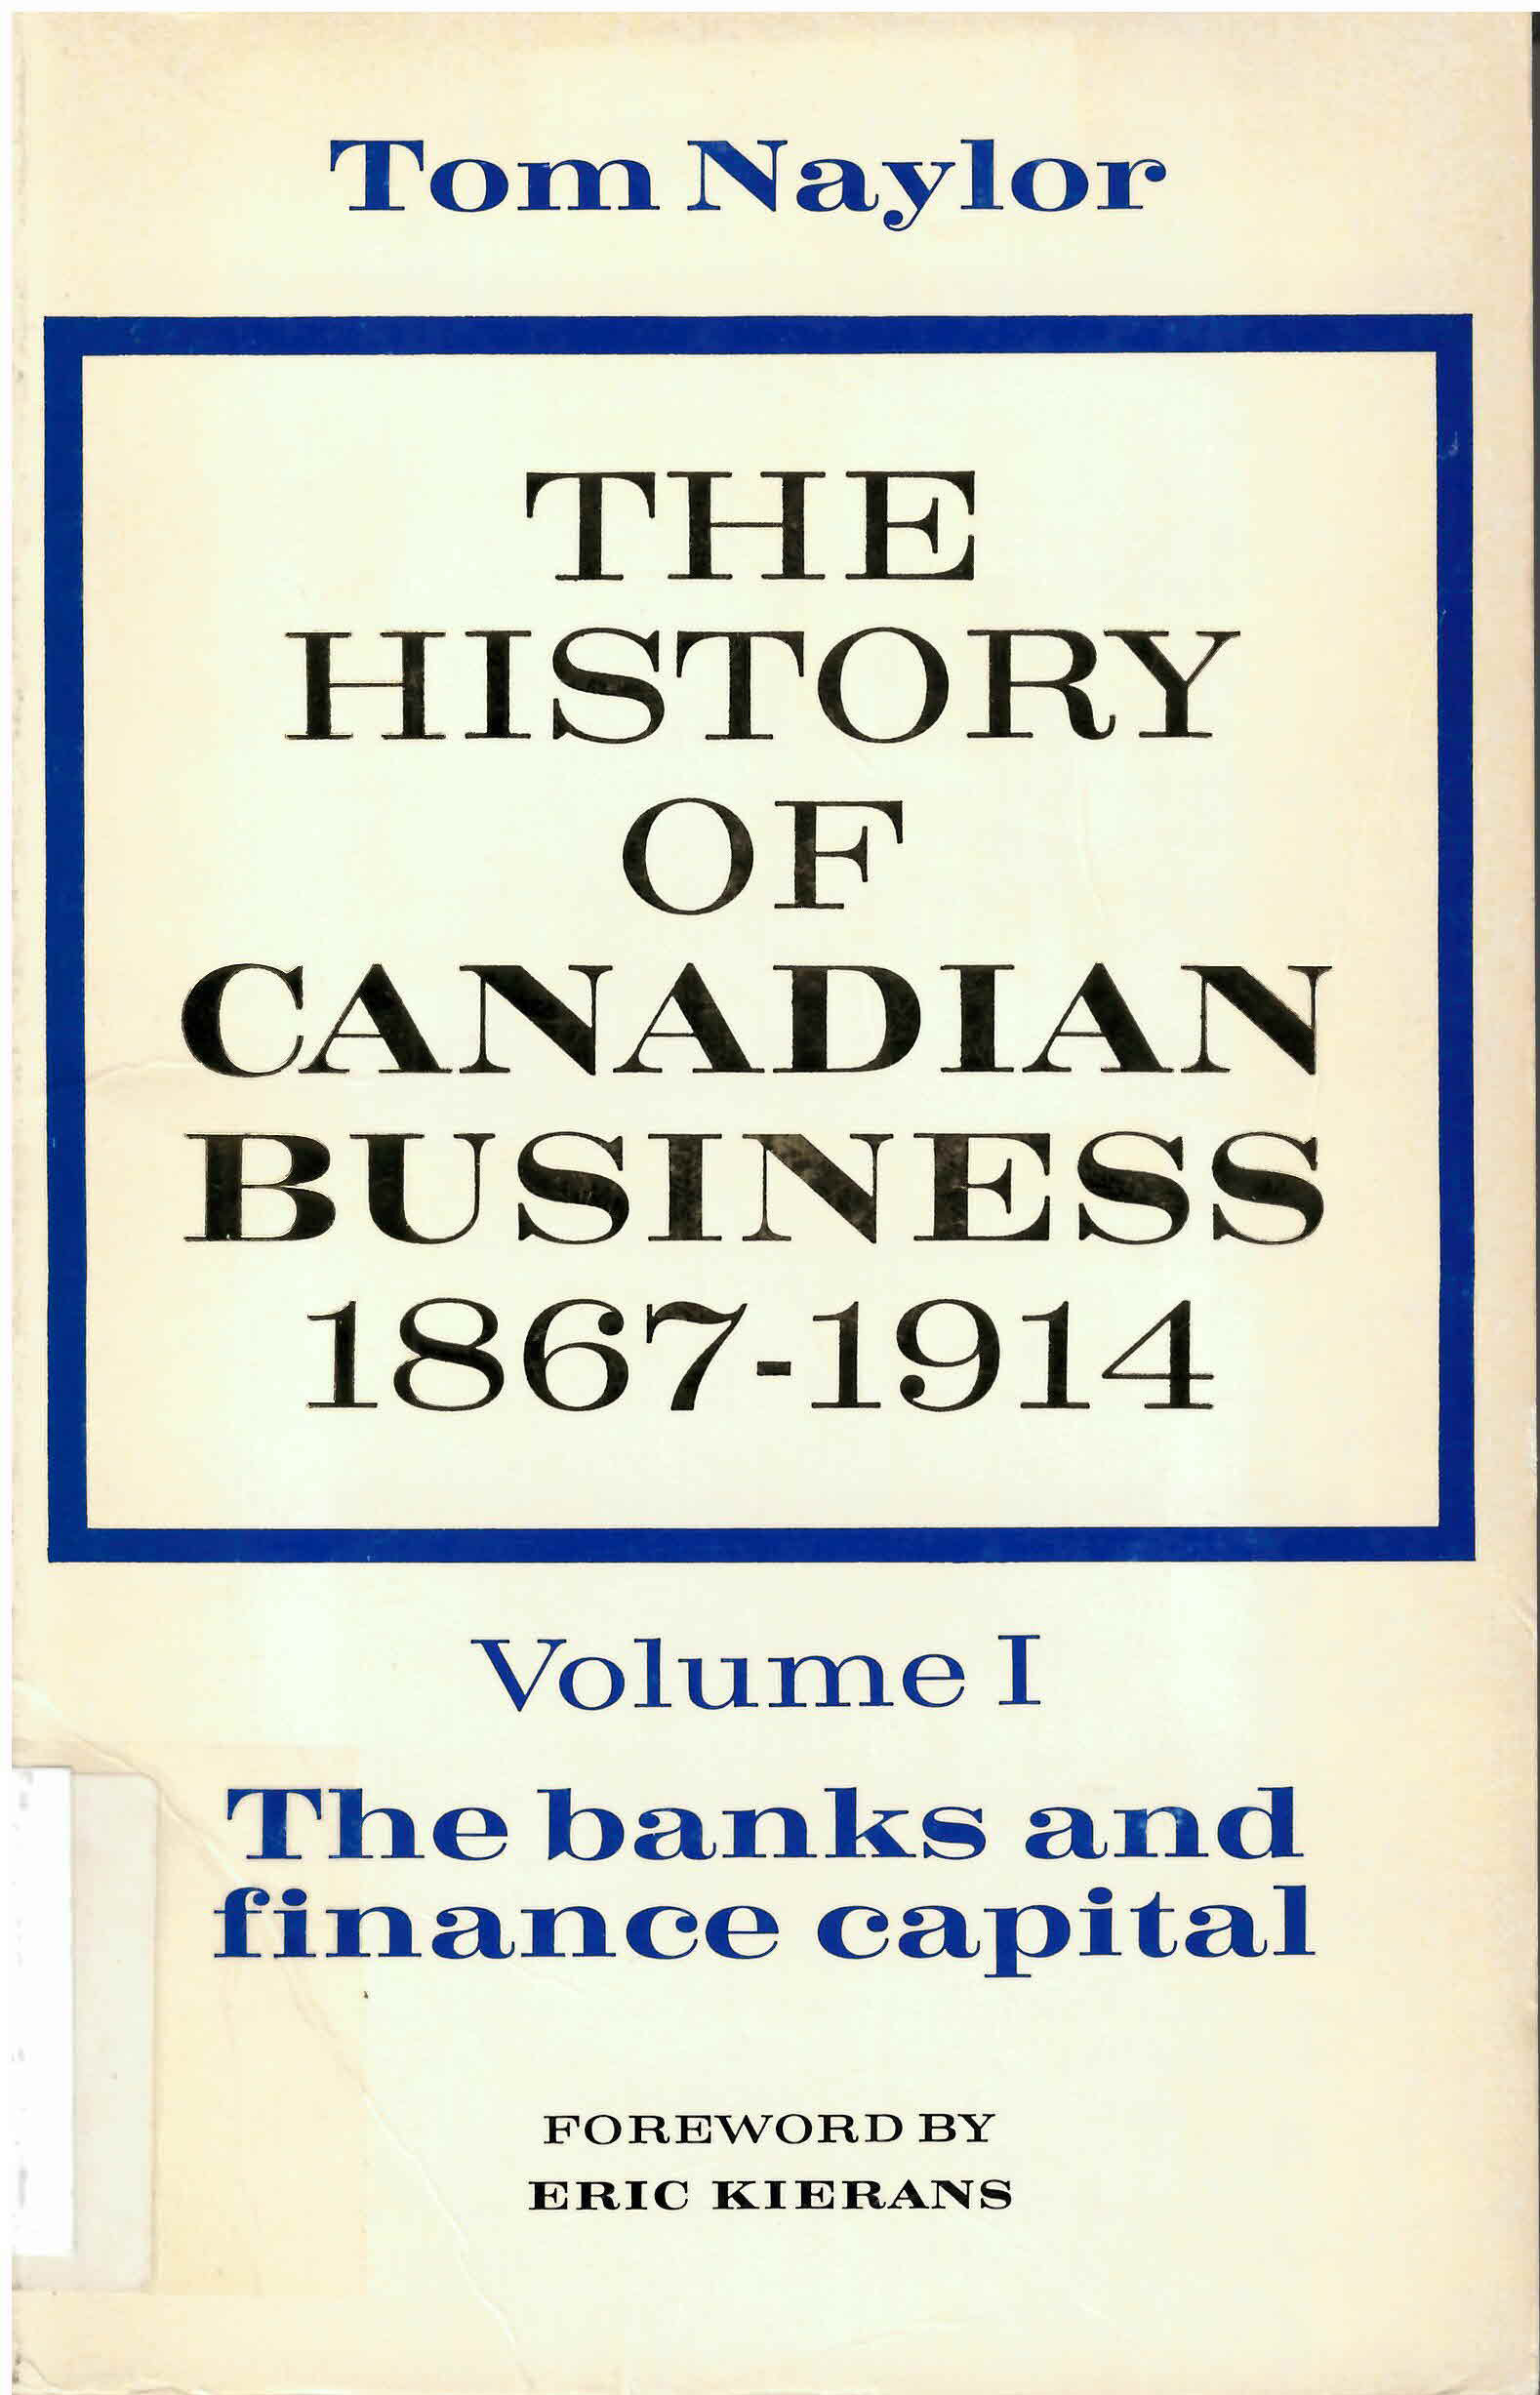 History of Canadian business, 1867-1914